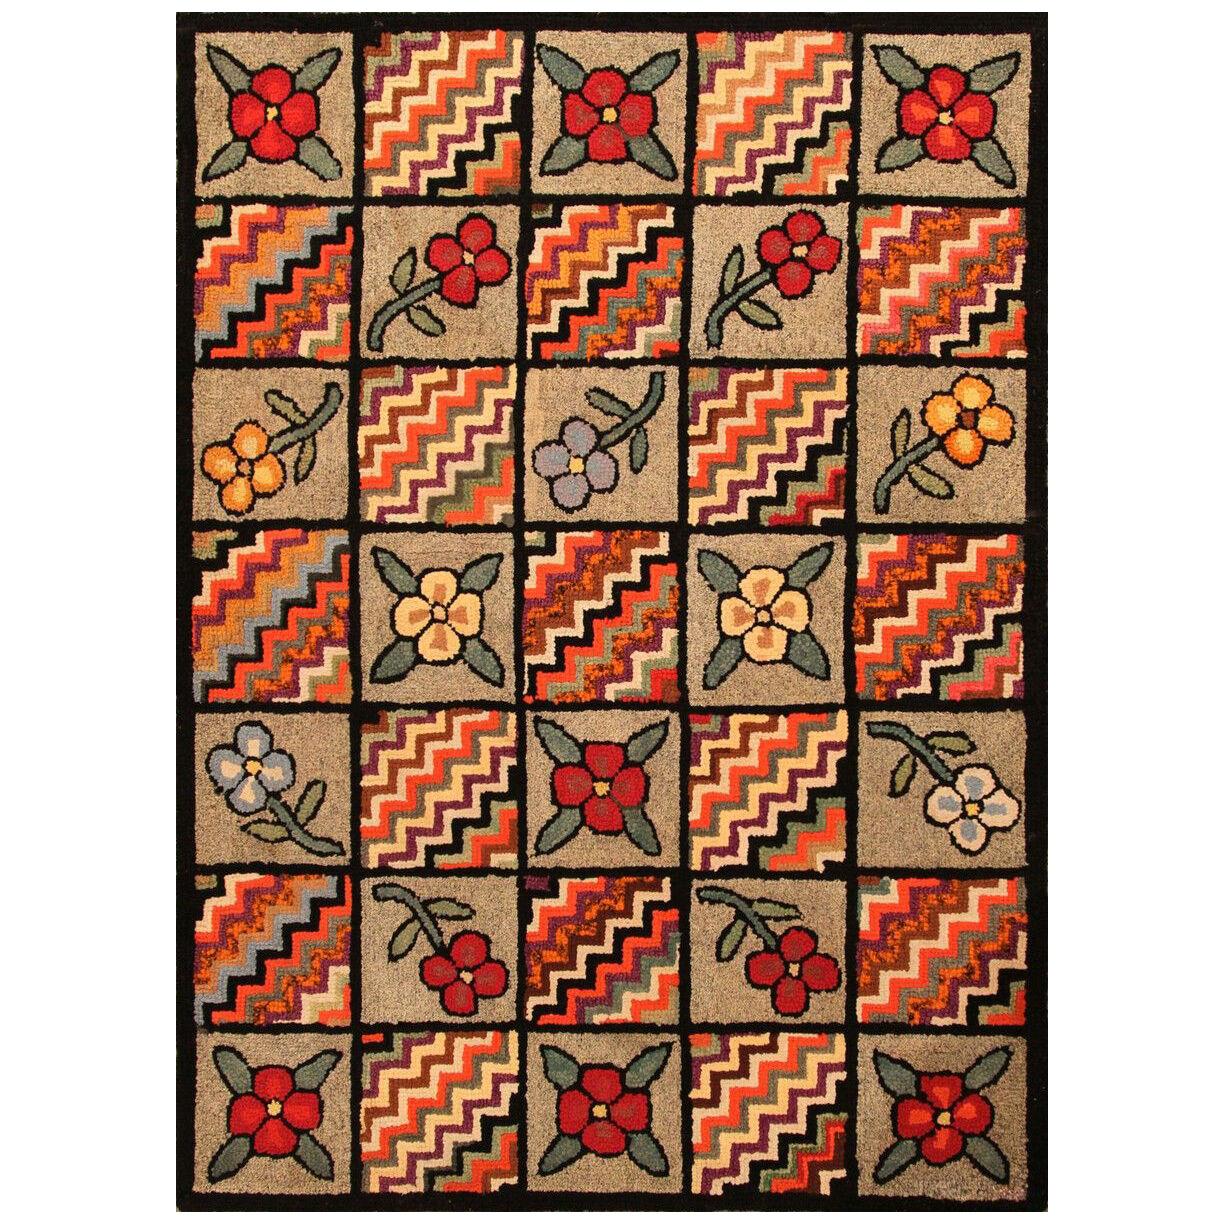 Antique Hand-hooked Green and Red Geometric Floral Wool Rug